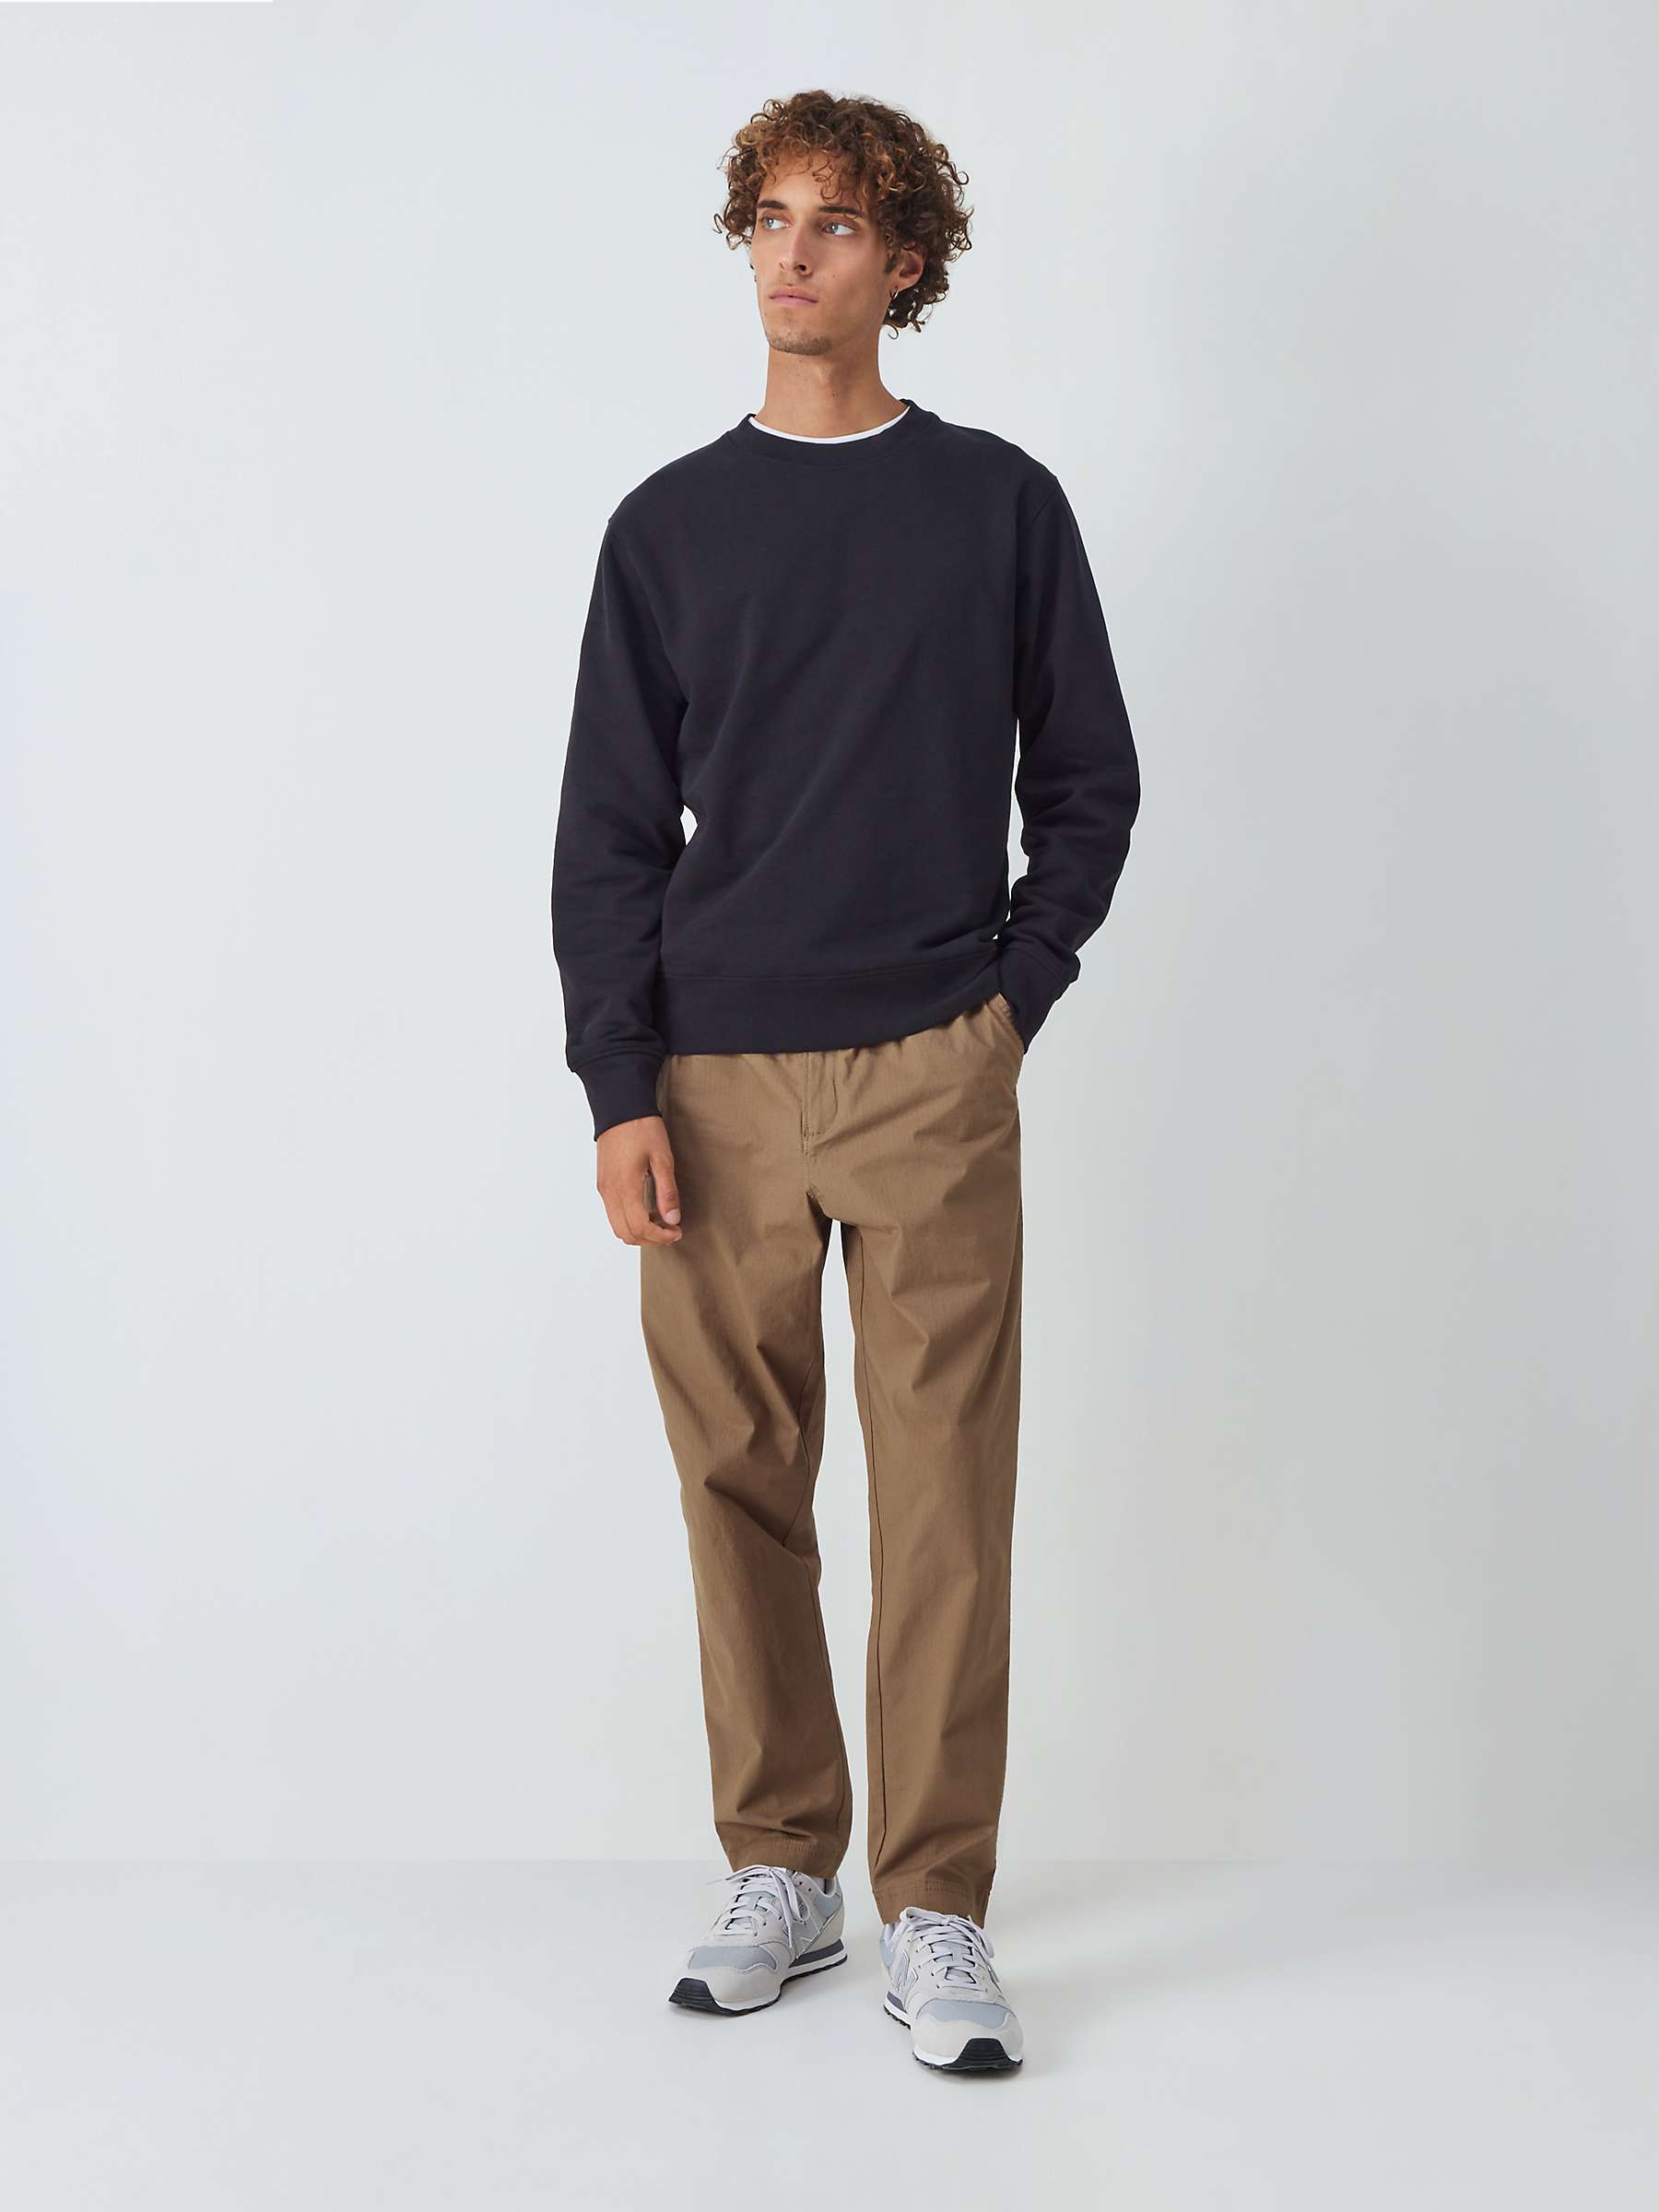 Buy John Lewis ANYDAY Relaxed Fit Ripstop Stretch Cotton Ankle Trousers Online at johnlewis.com